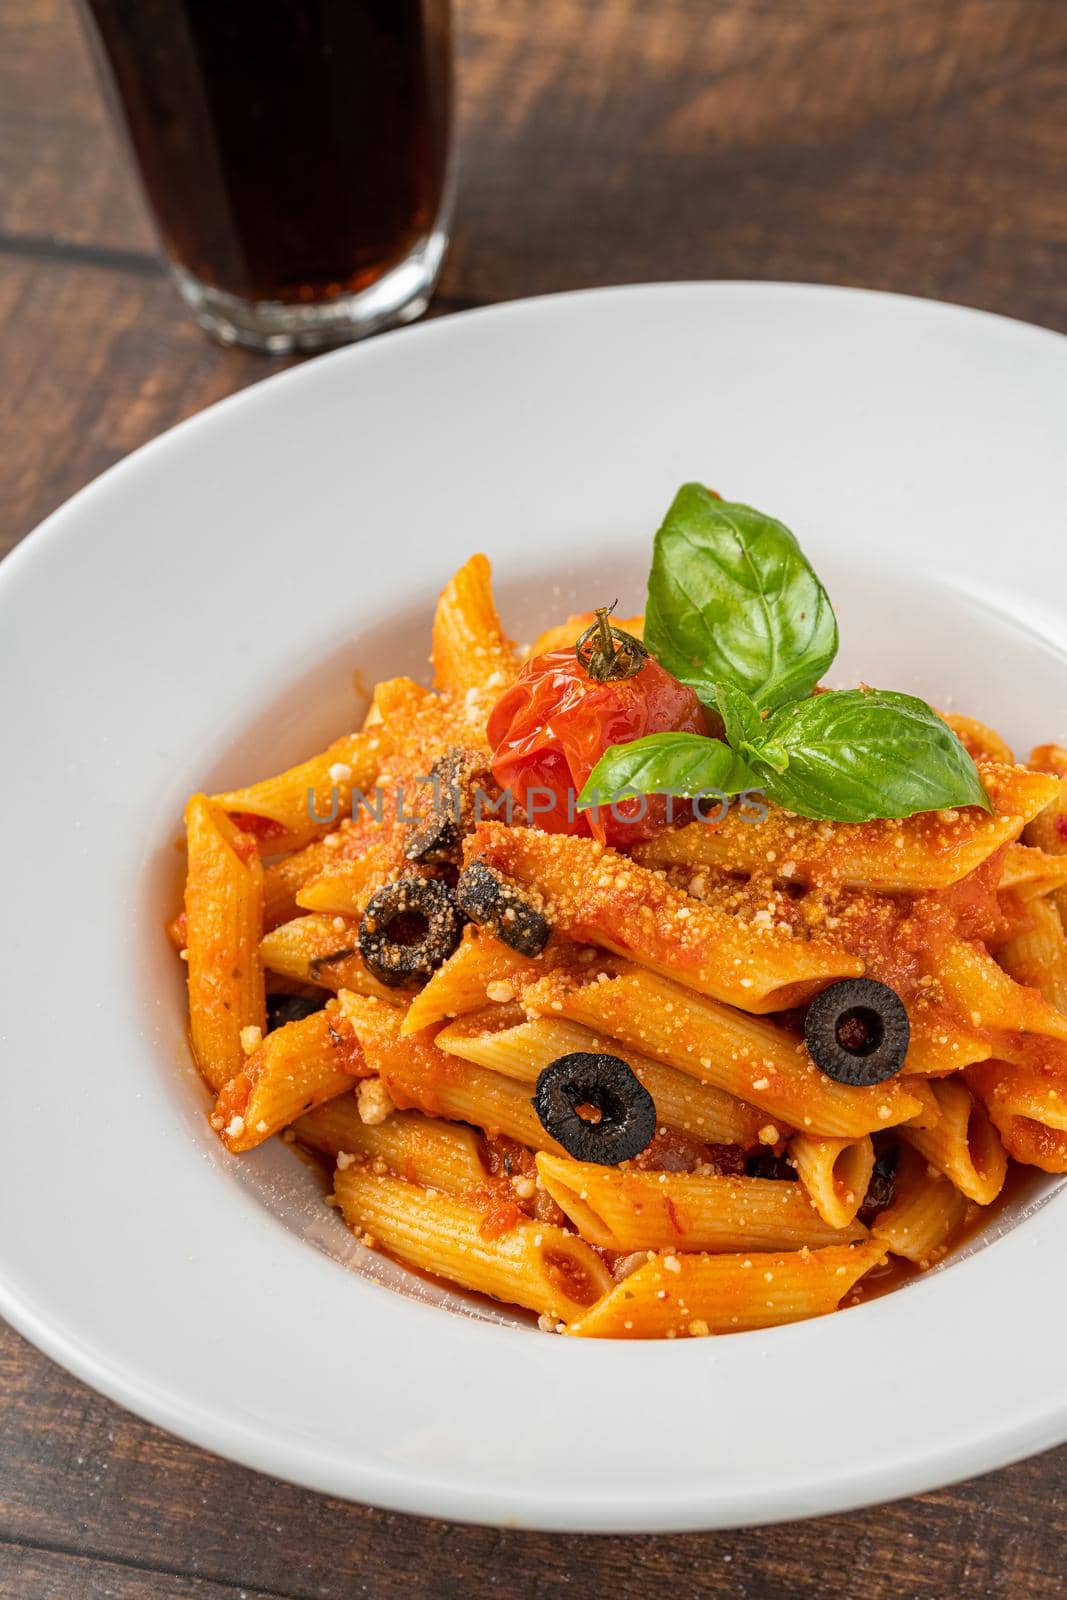 Penne pasta in tomato sauce, tomatoes decorated with parsley on a wooden background by Sonat